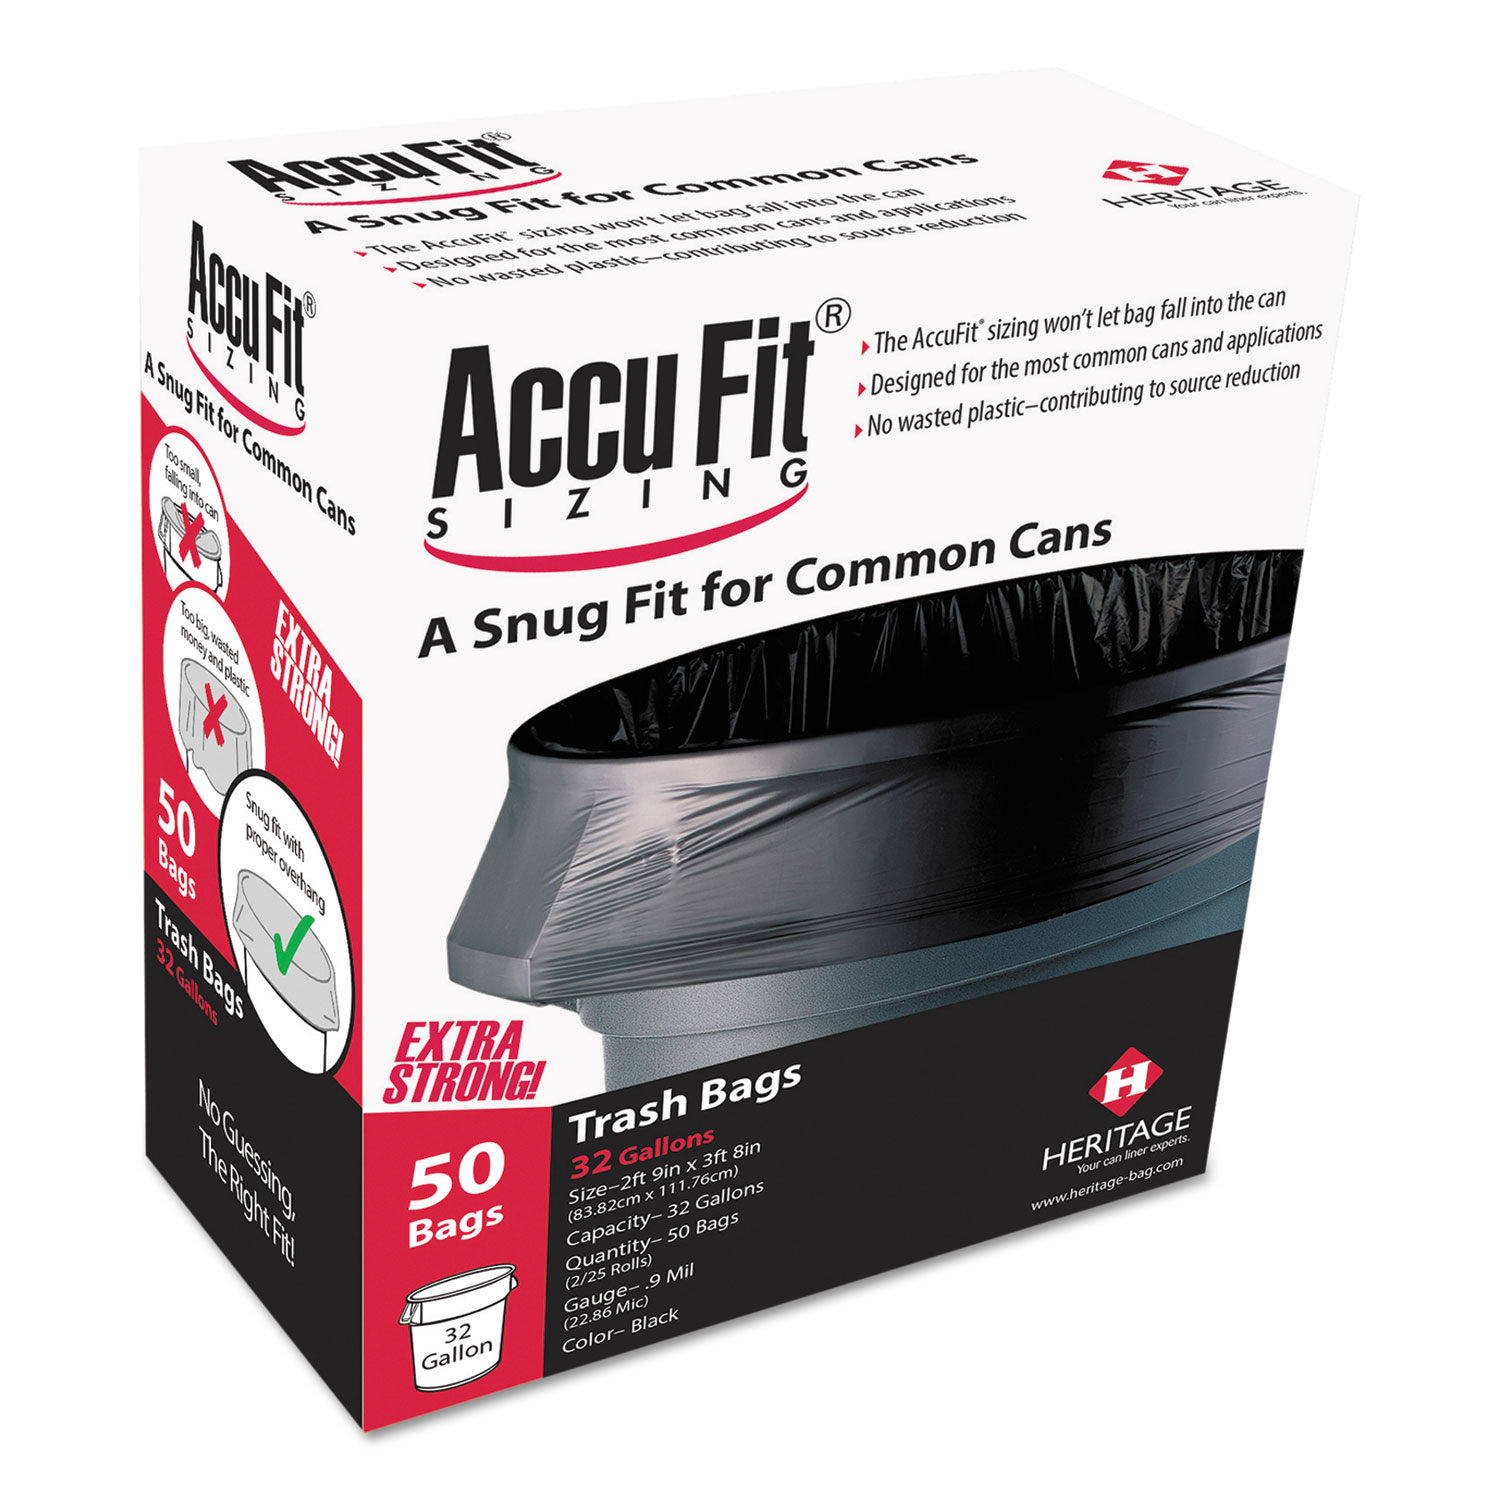  AccuFit H7450TK RC1 Linear Low Density Can Liners with AccuFit Sizing, 44 gal, 0.9 mil, 37 x 50, Black, 50/Box (HERH7450TKRC1) 